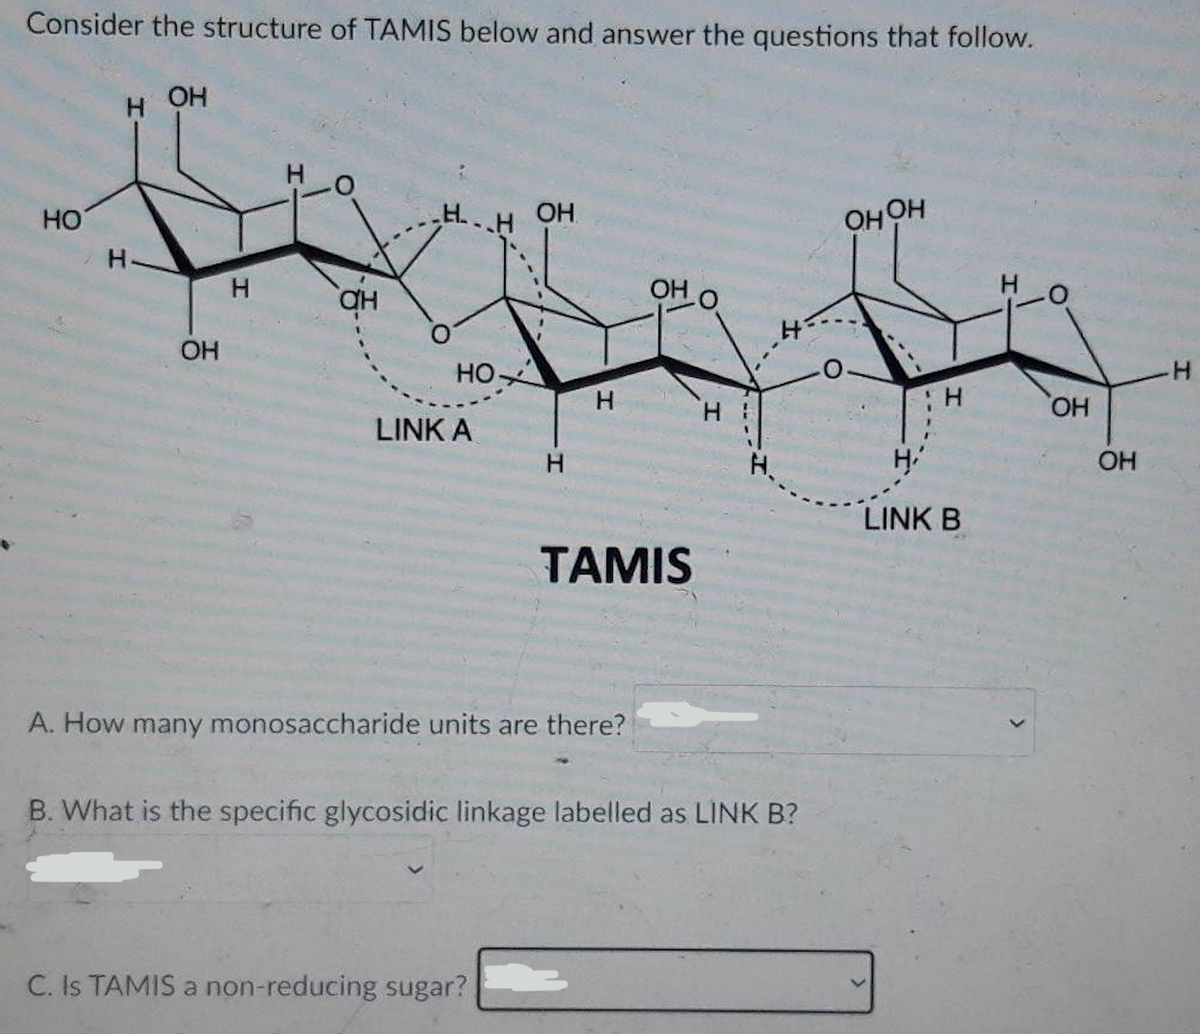 Consider the structure of TAMIS below and answer the questions that follow.
H OH
НО
Н
OH
H
-0
ан
Н.
НО-
LINK A
H
ОН
C. Is TAMIS a non-reducing sugar?
Н
Н
A. How many monosaccharide units are there?
ОН О
TAMIS
I
H.
B. What is the specific glycosidic linkage labelled as LINK B?
Онон
Н
H
LINK B
OH
ОН
H